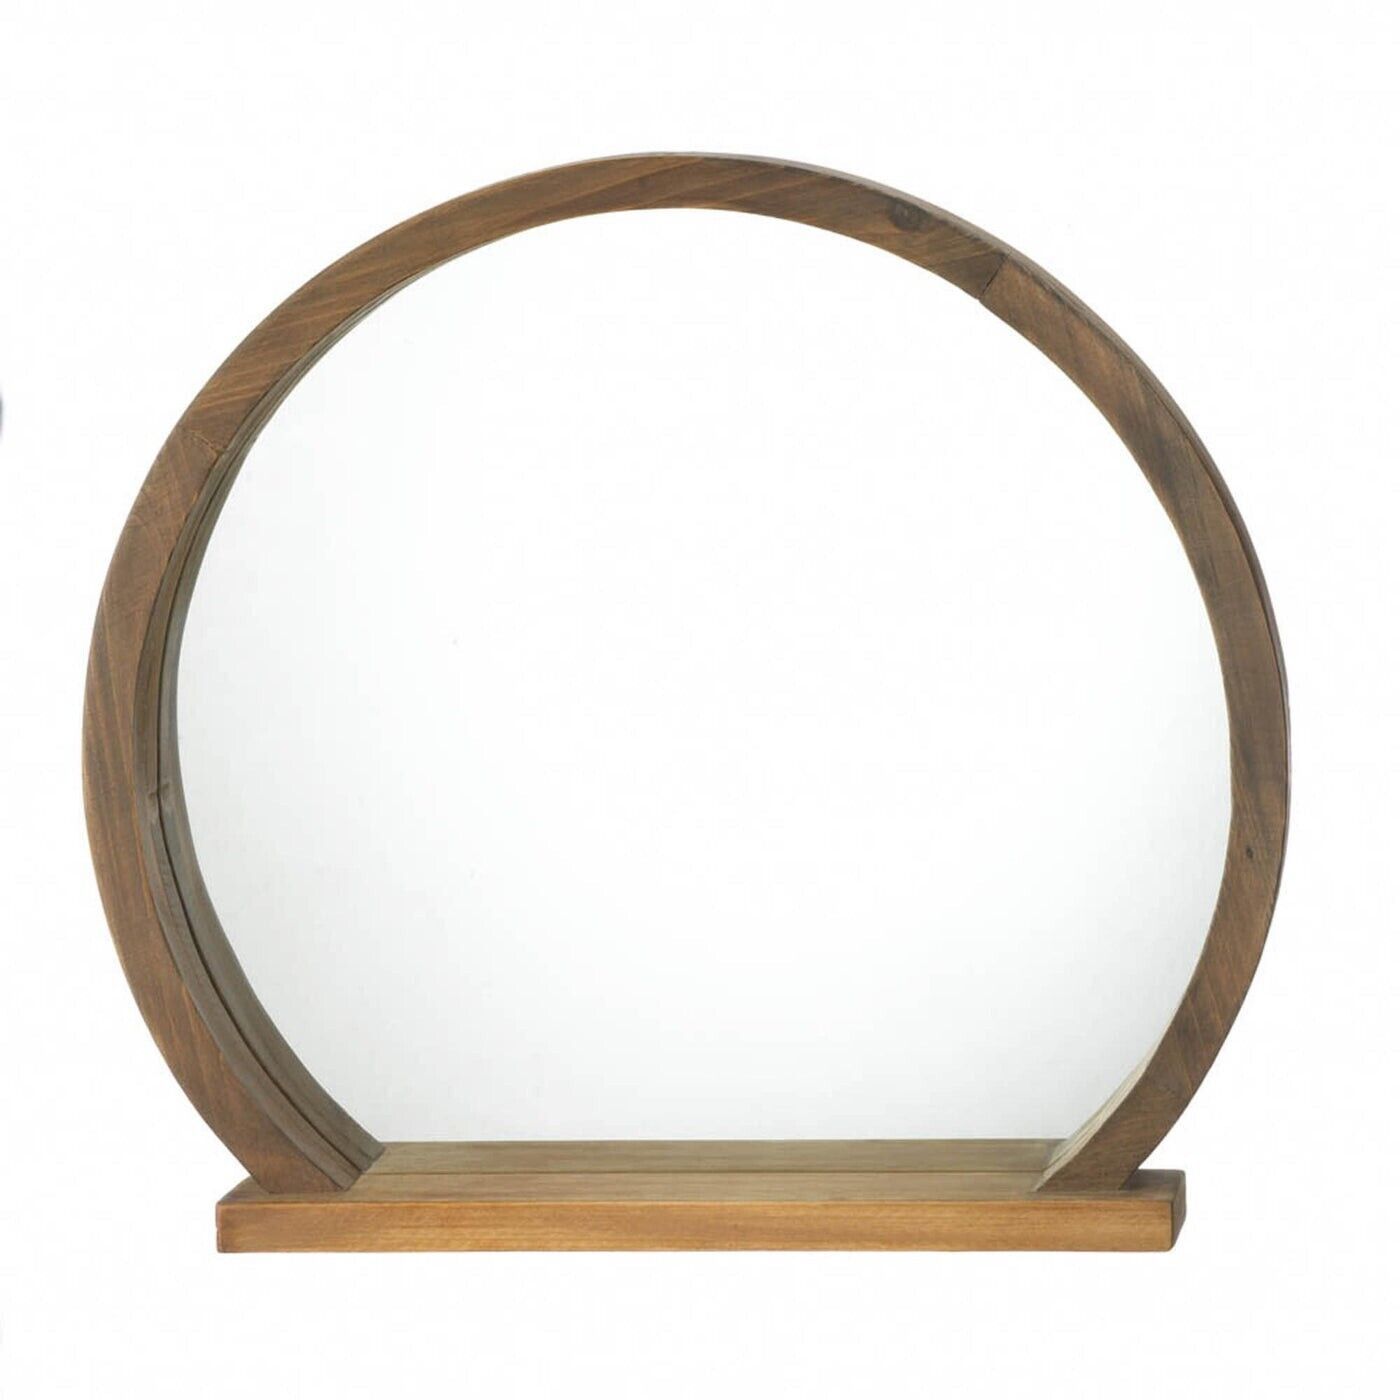 Rustic Look Country Round Wooden Entry Wall Mirror Small Shelf Chic Decor - $71.73